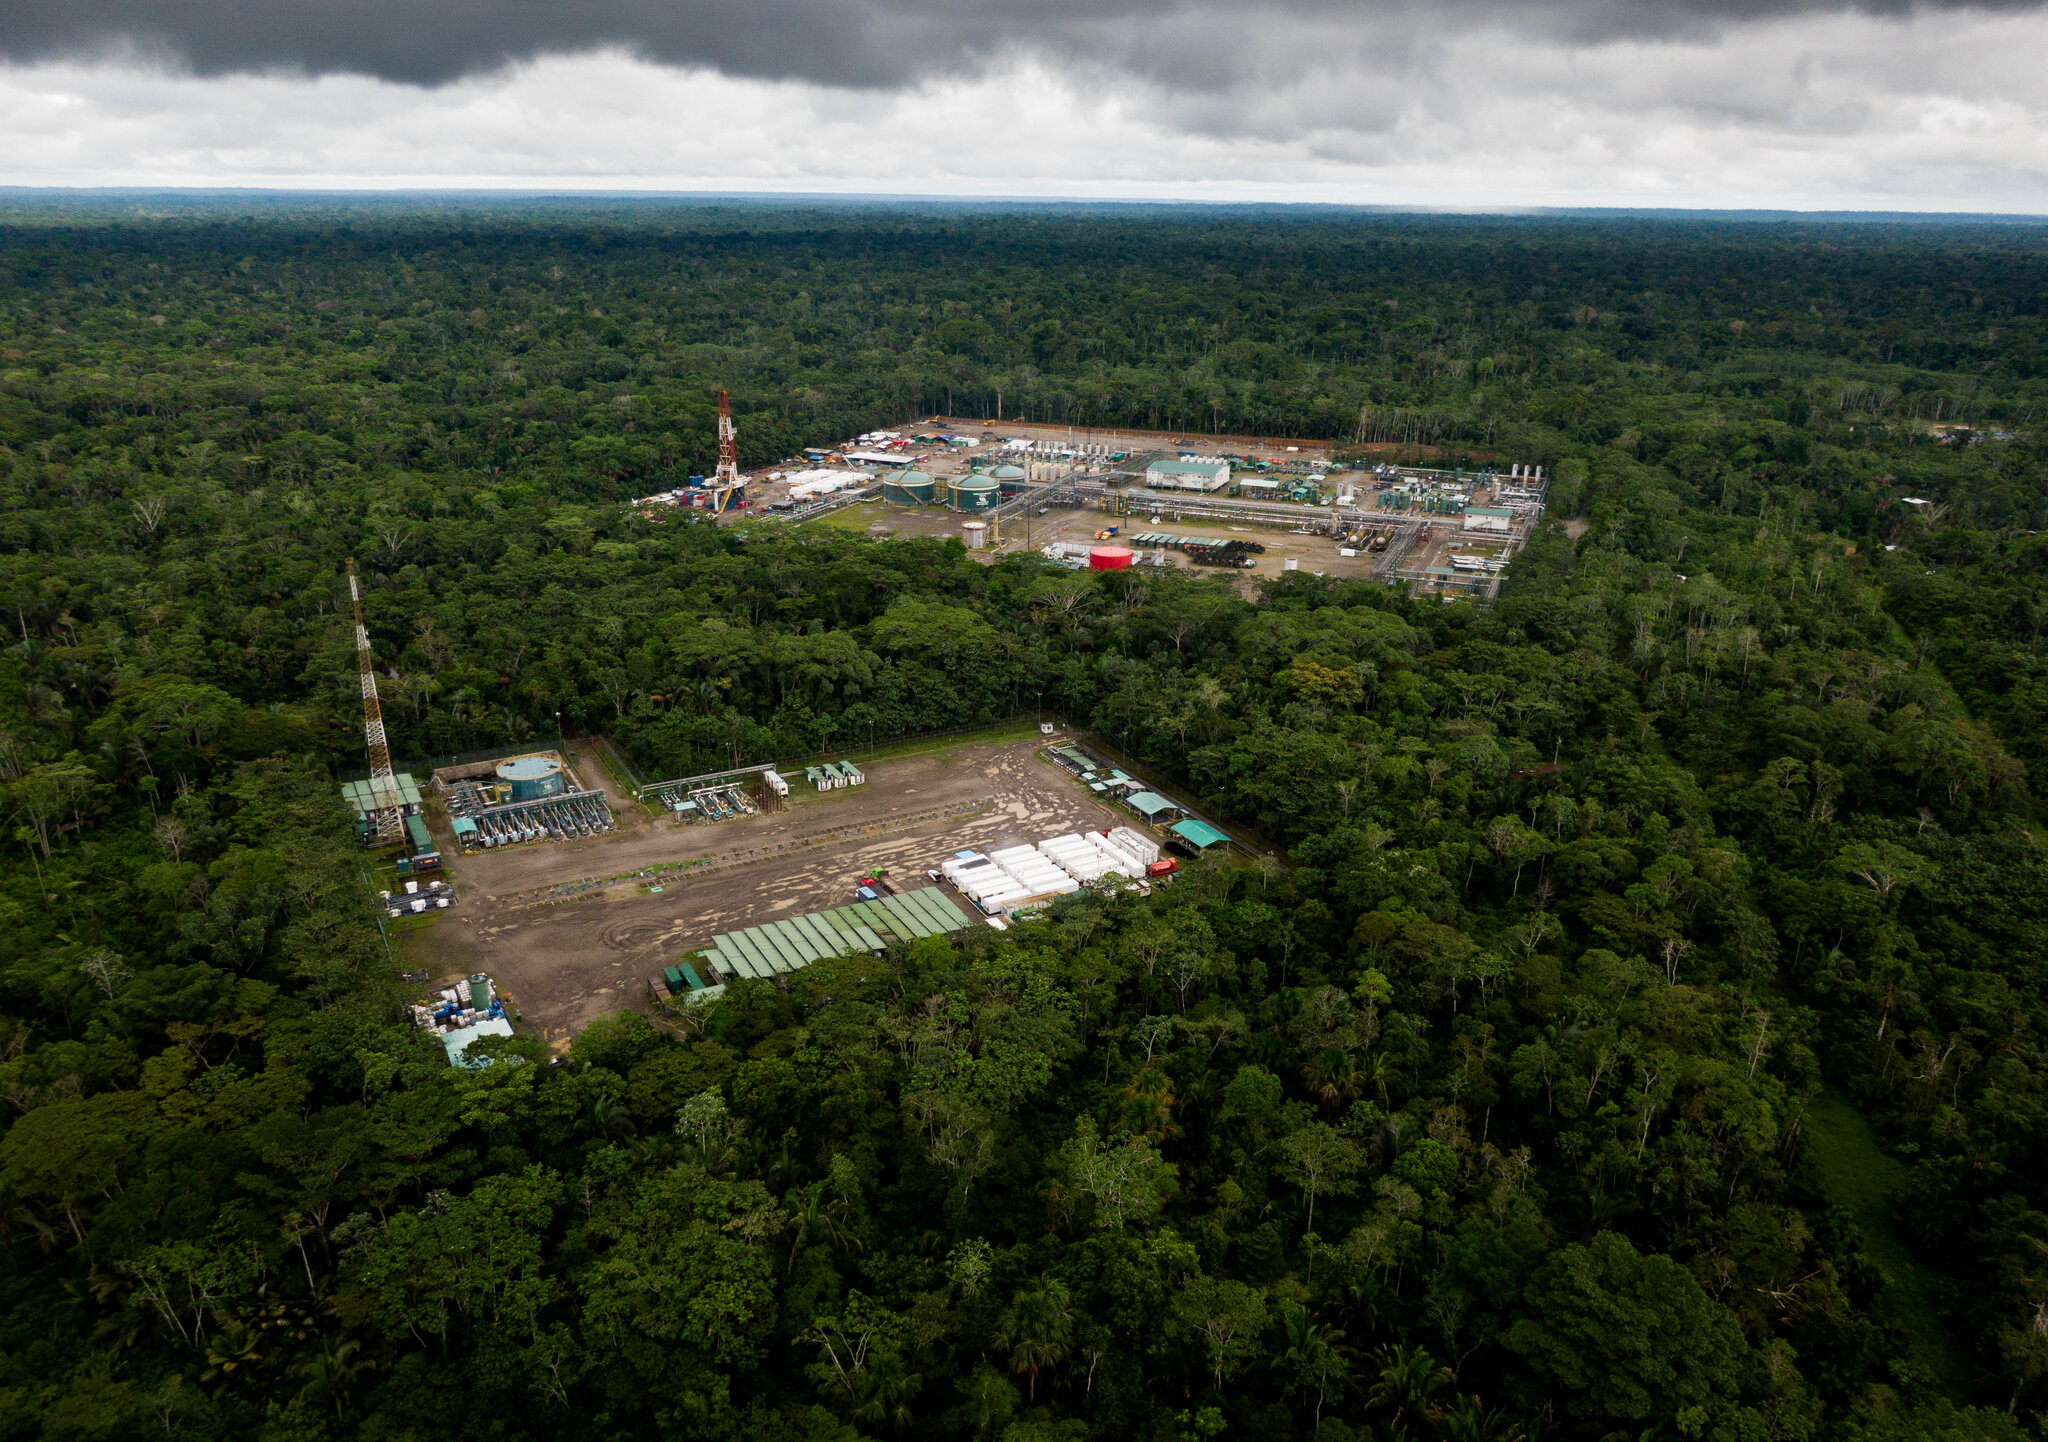 Indigenous people in Ecuador reject oil extraction in Yasuni